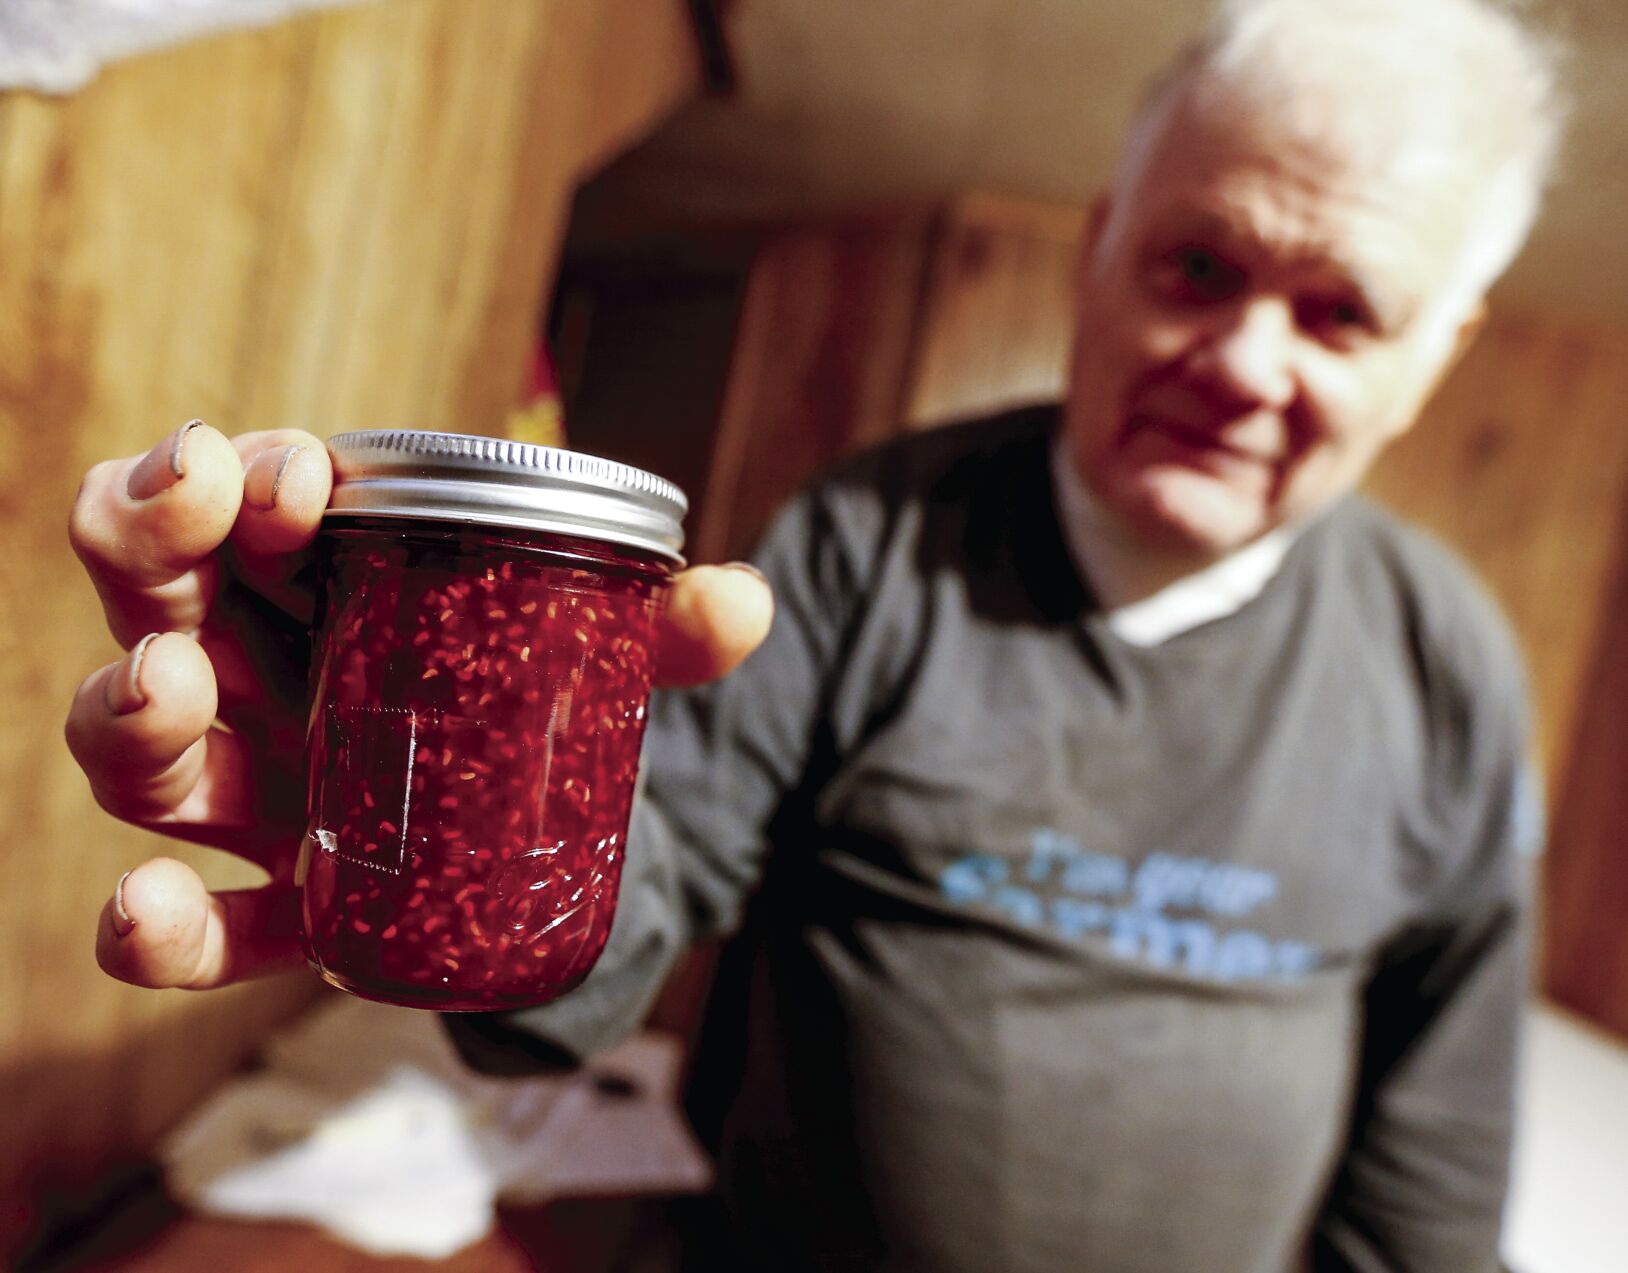 Walter Hammerand, of Fennimore, Wis., holds out jam that he sells.    PHOTO CREDIT: Dave Kettering
Telegraph Herald